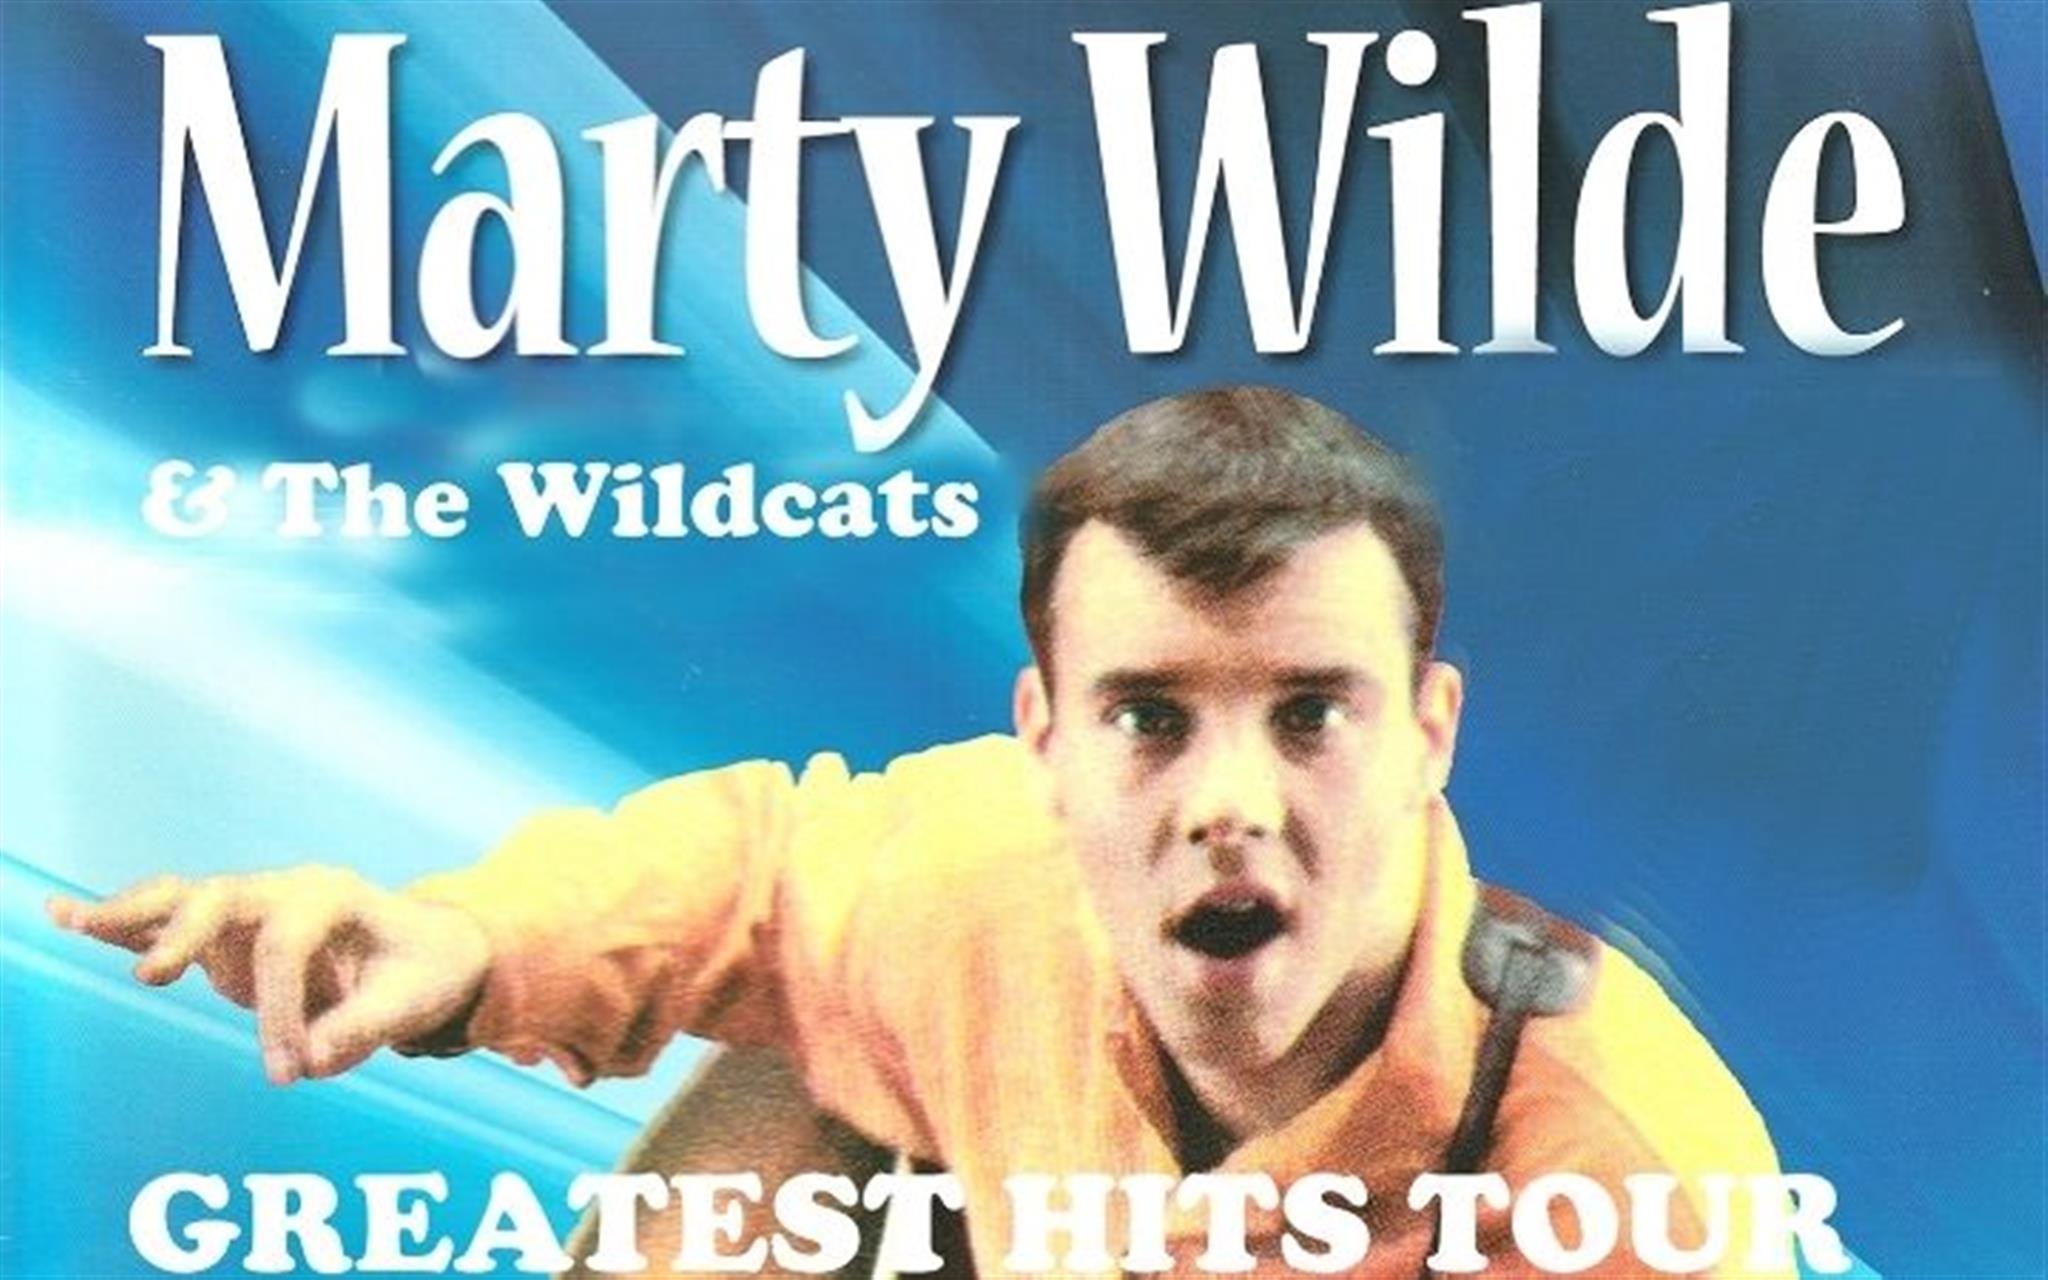 Marty Wilde & The Wildcats image